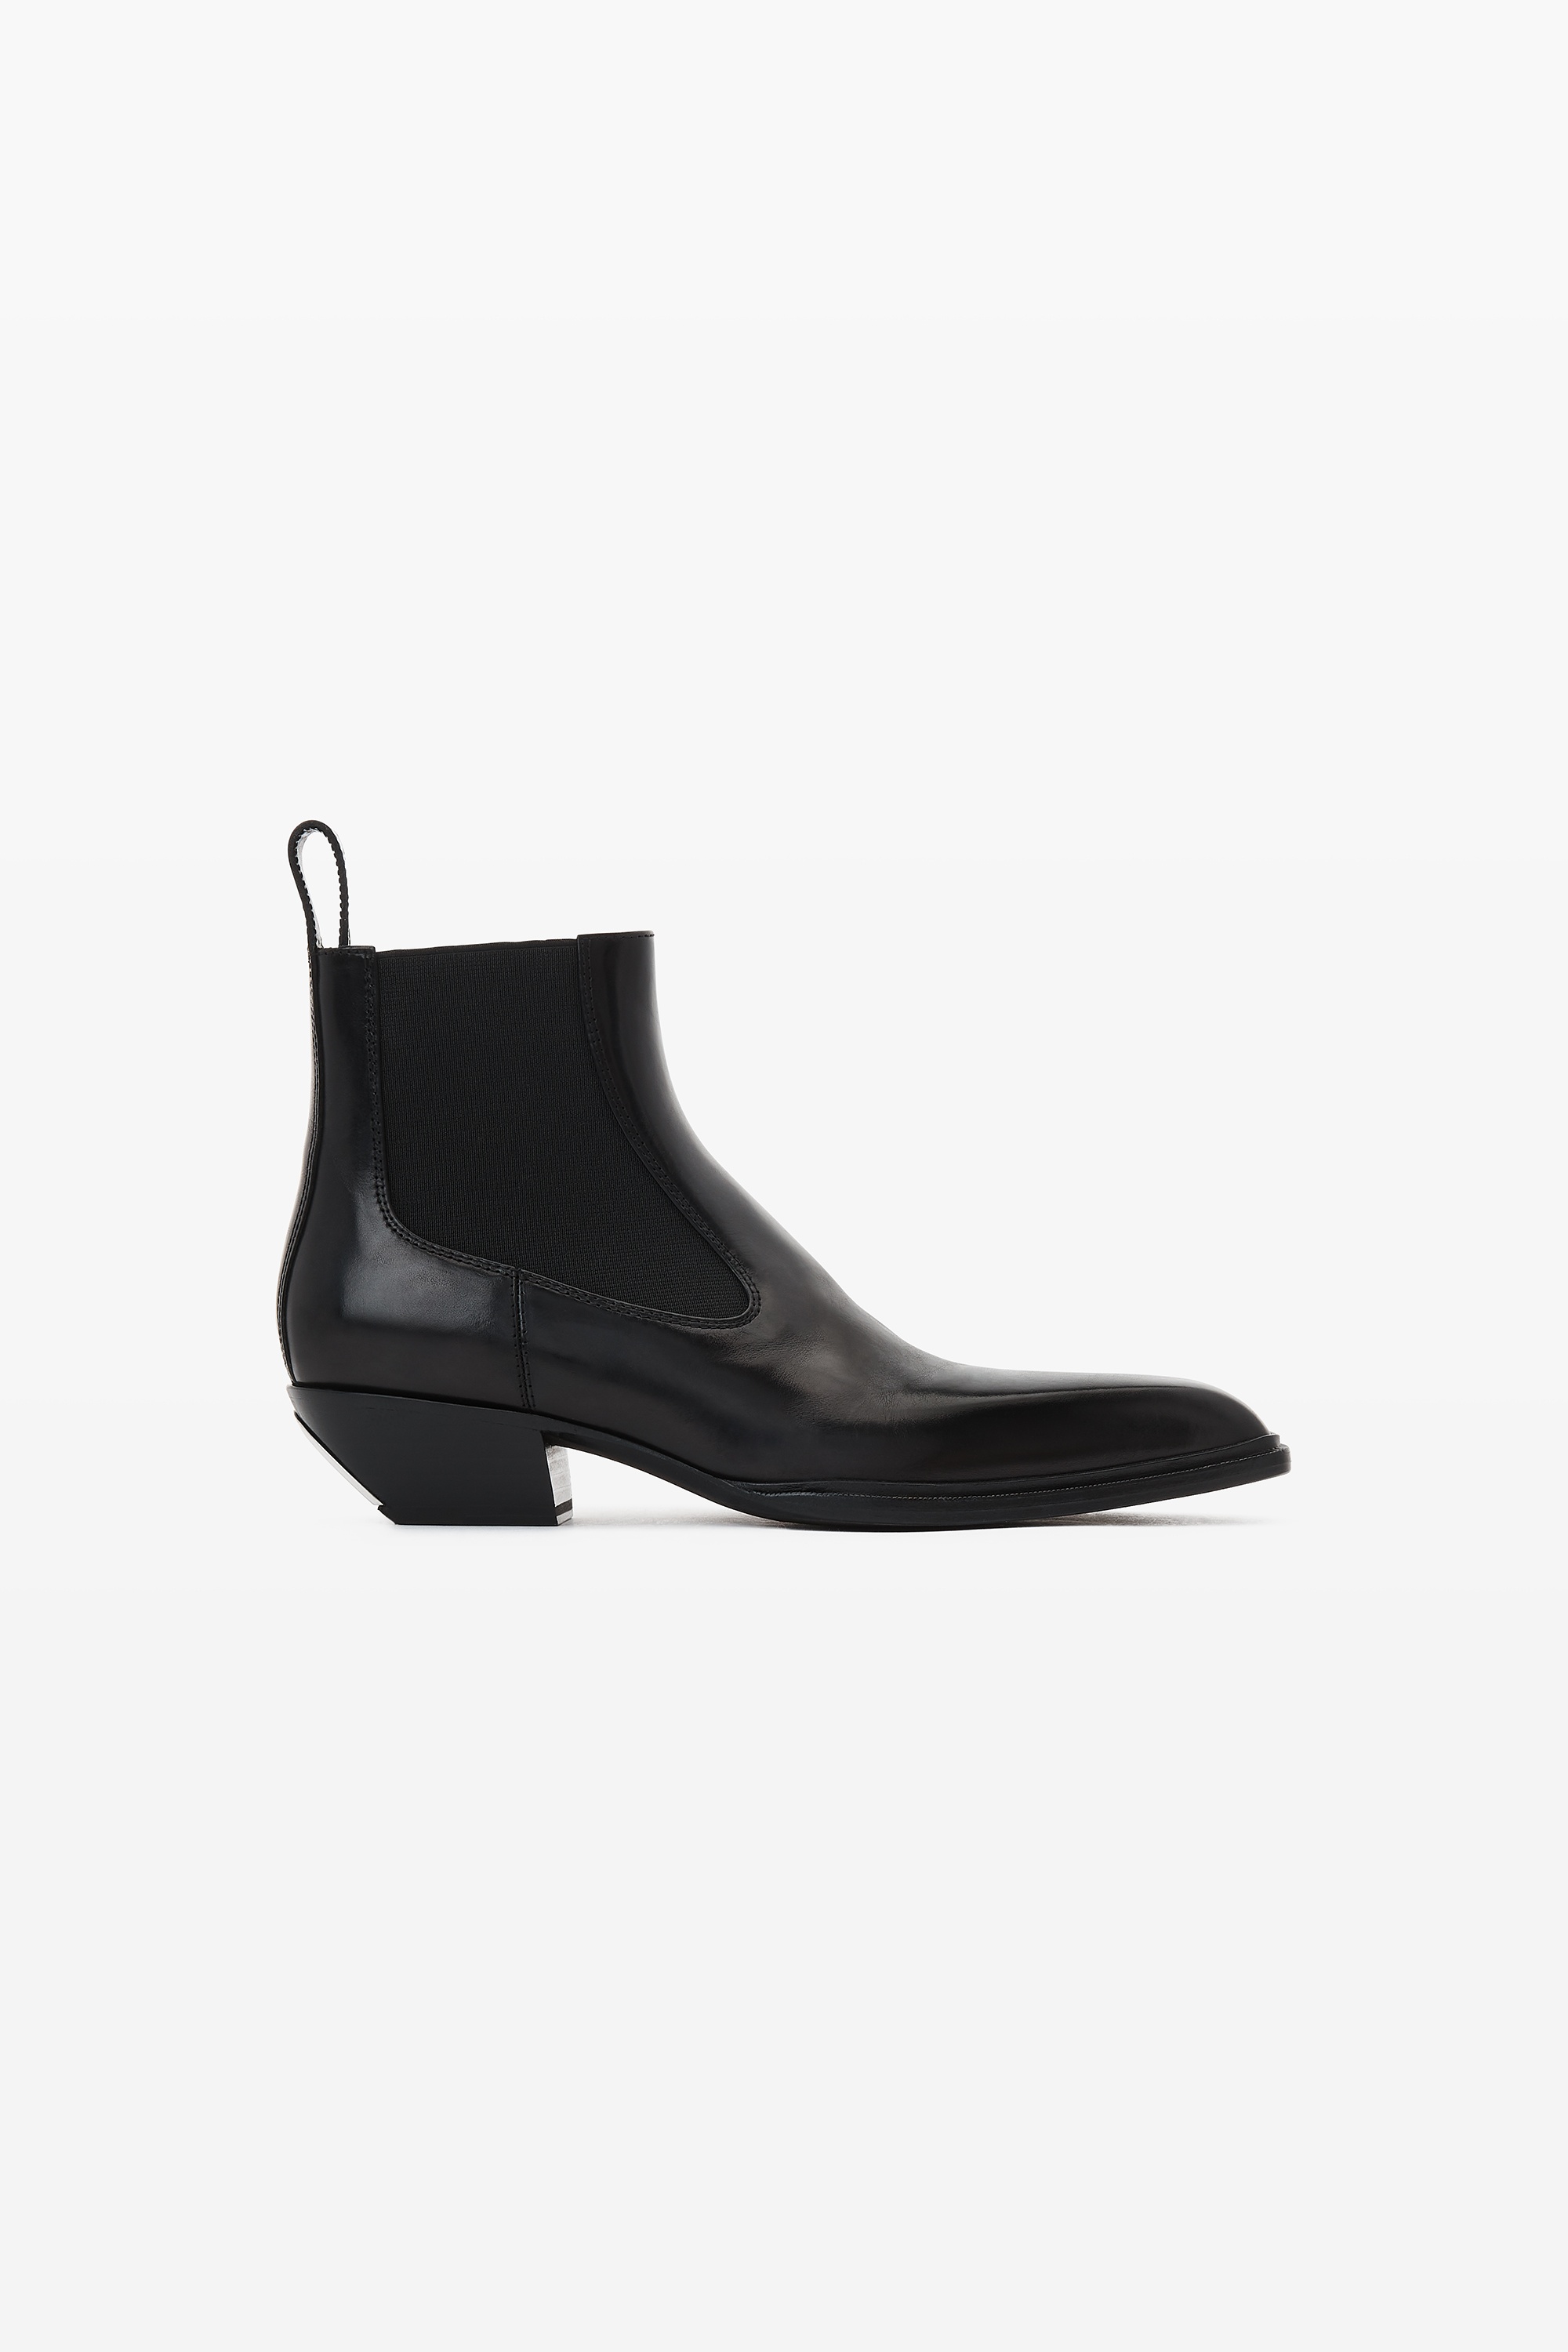 slick smooth leather  ankle boot - 1